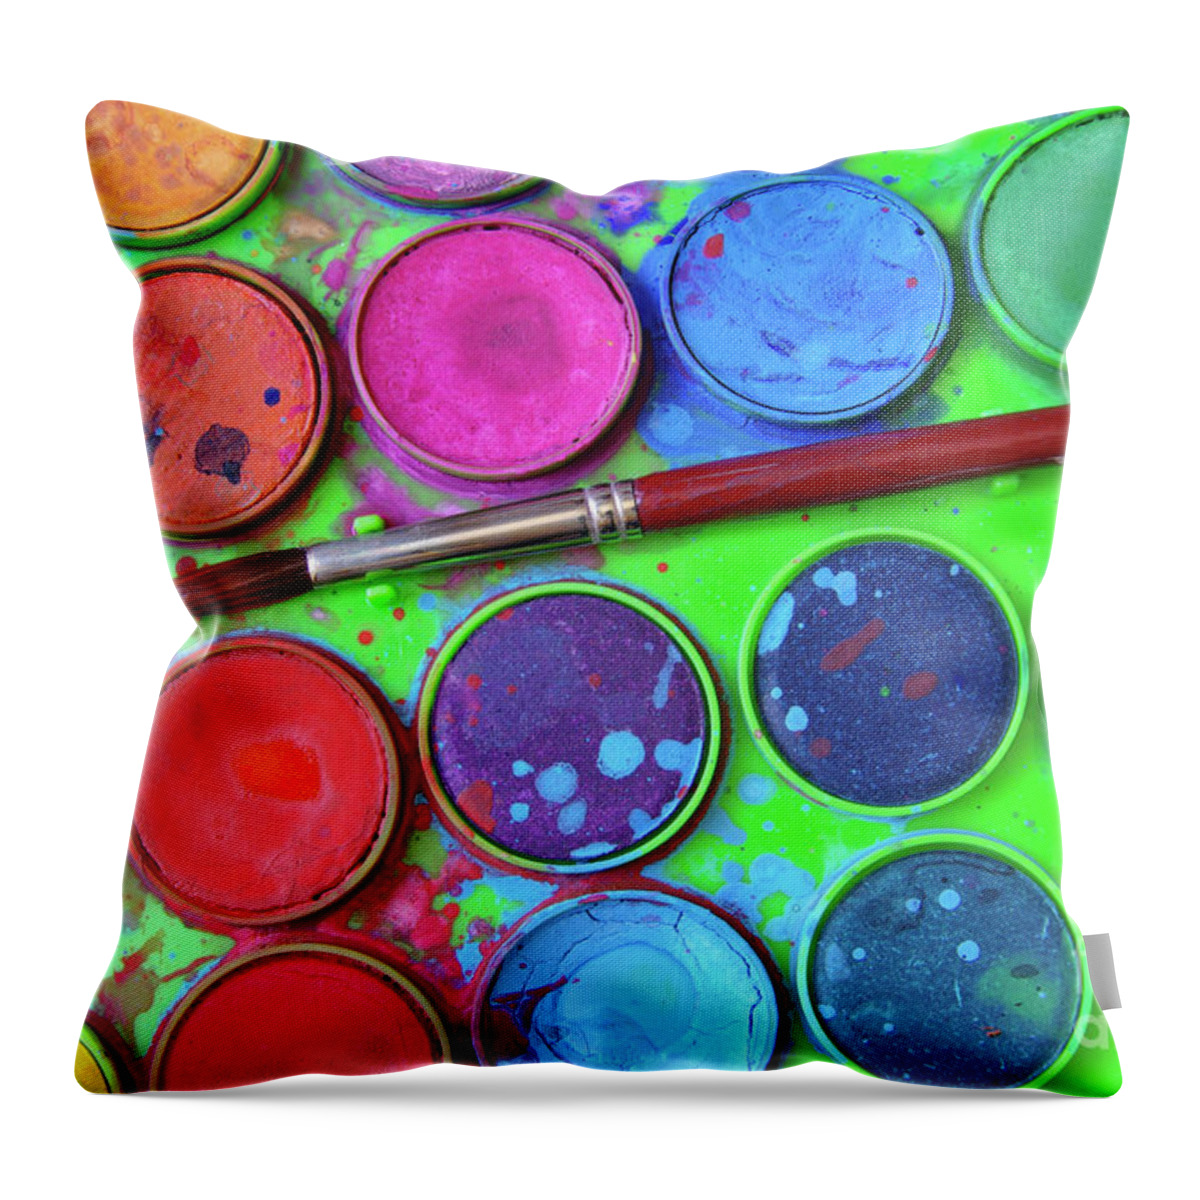 Art Throw Pillow featuring the photograph Watercolor Palette by Carlos Caetano